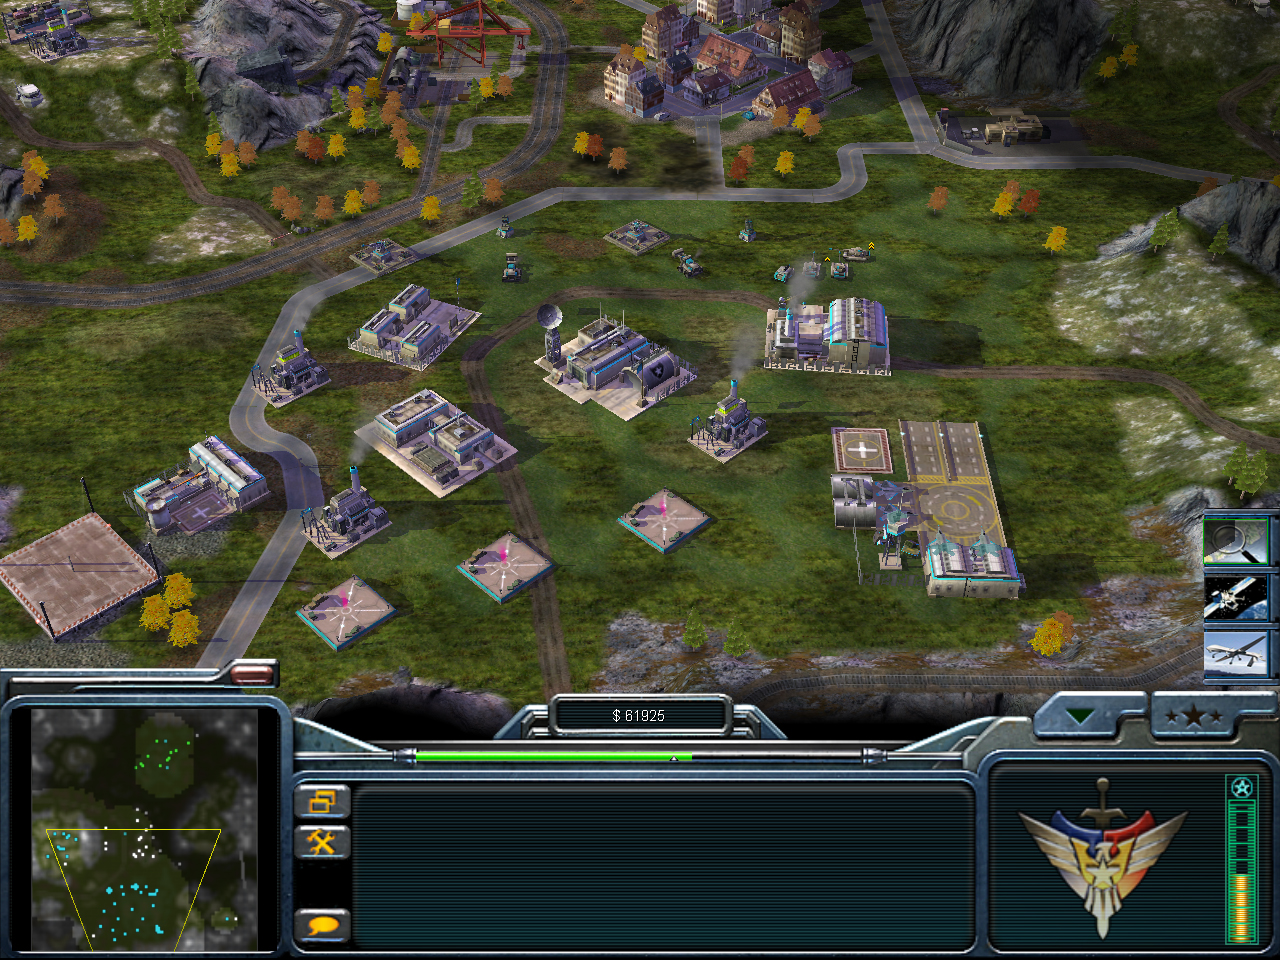 Command And Conquer: Generals free - Download latest